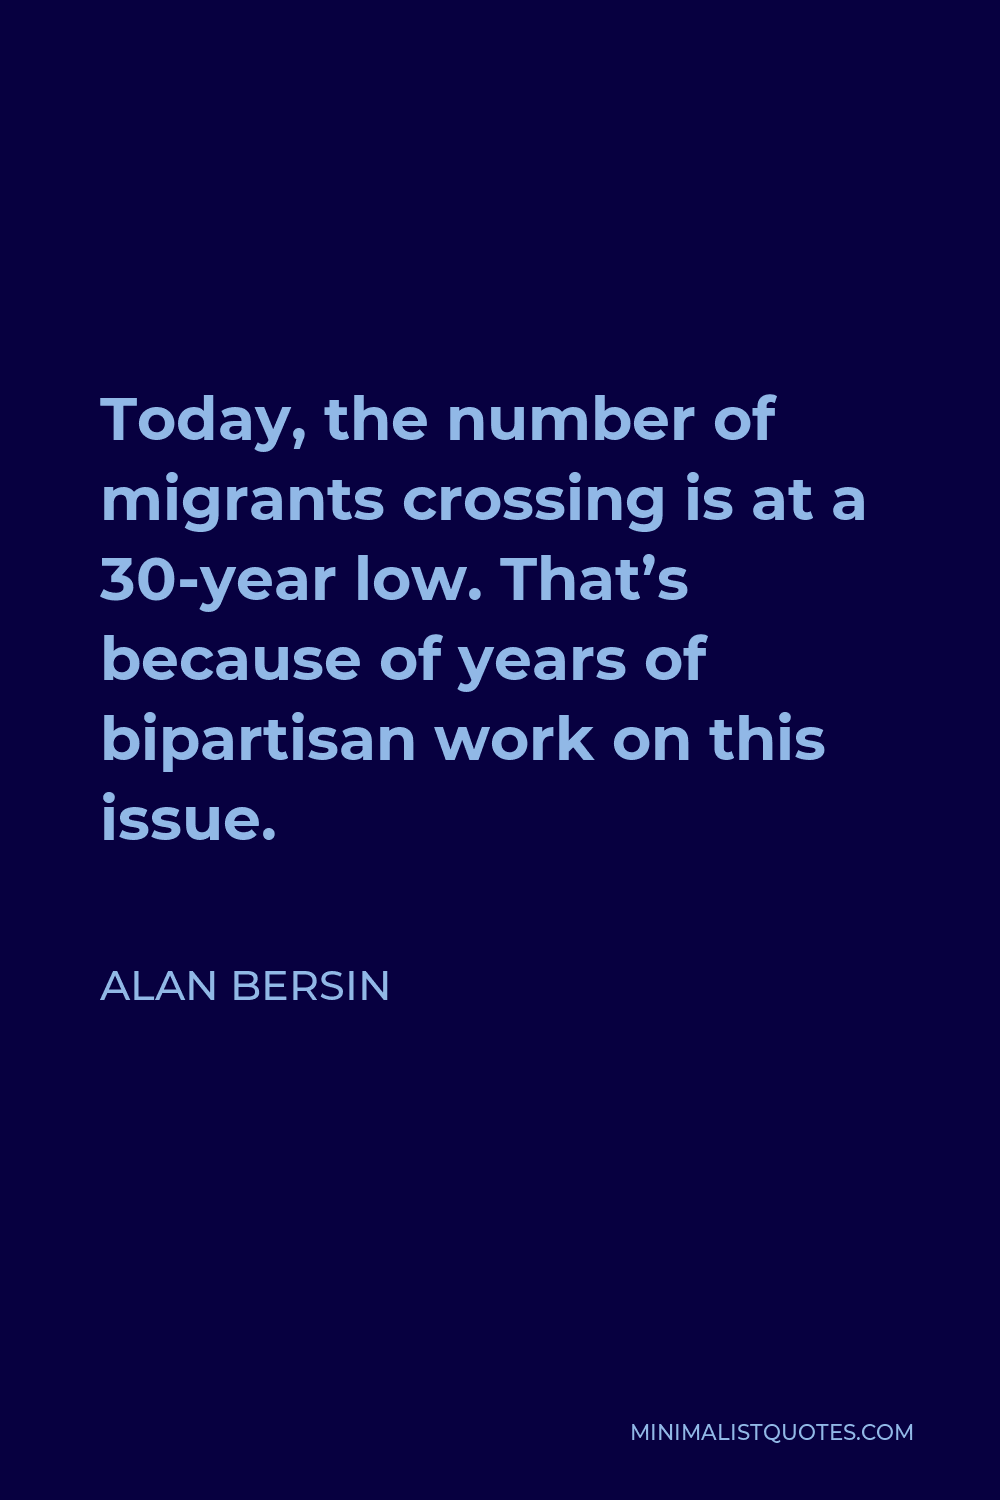 Alan Bersin Quote - Today, the number of migrants crossing is at a 30-year low. That’s because of years of bipartisan work on this issue.